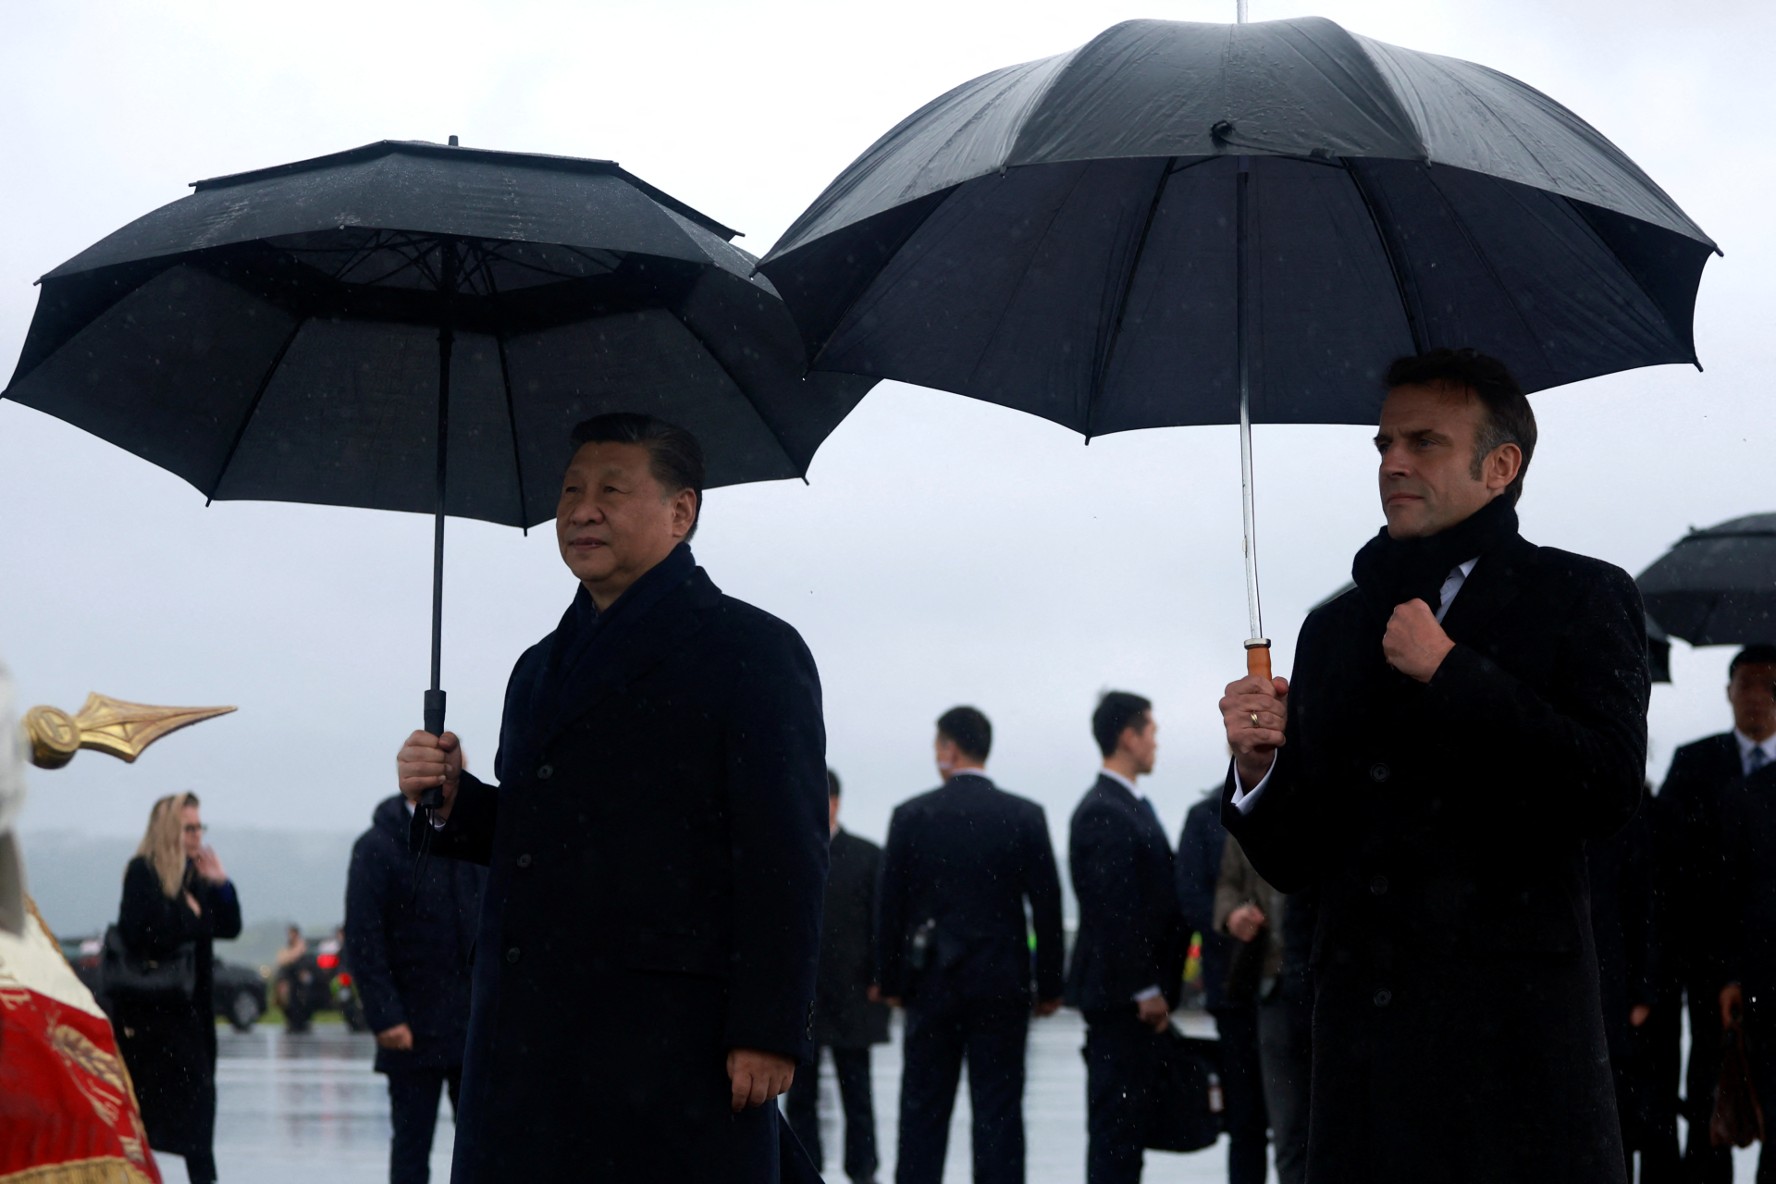 Xi's visit reveals flaws in European unity